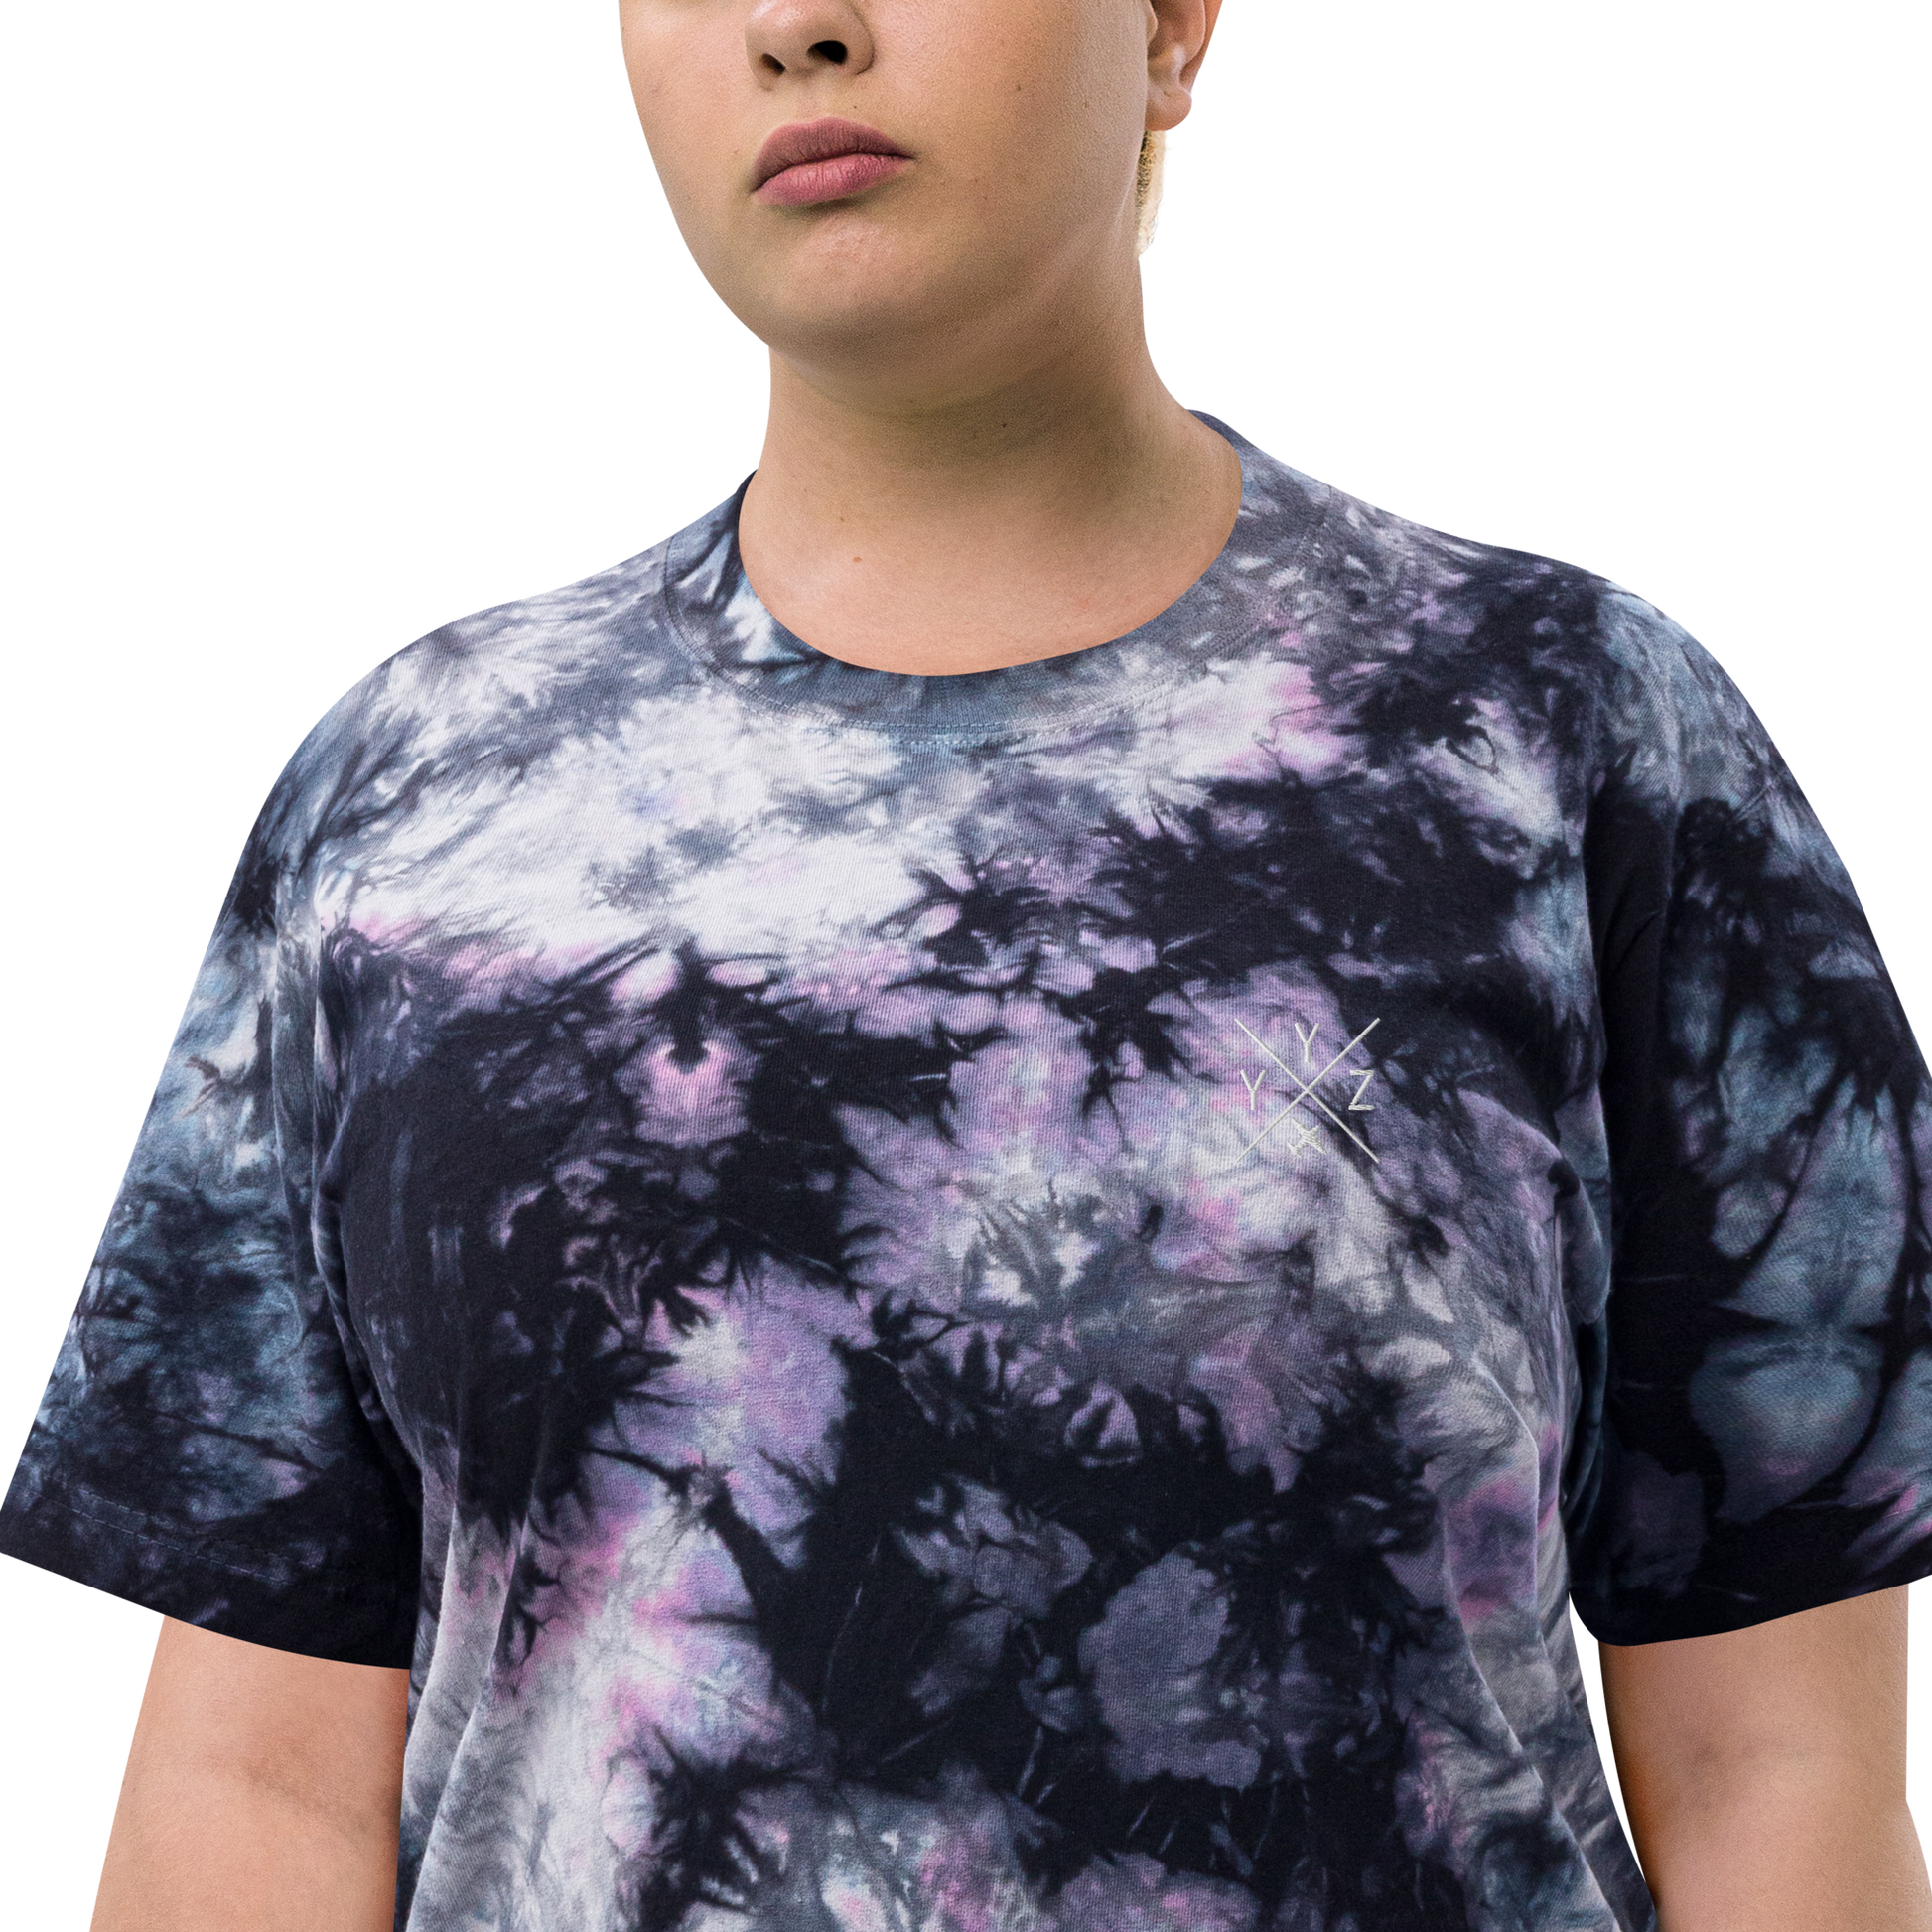 YHM Designs - YYZ Toronto Oversized Tie-Dye T-Shirt - Crossed-X Design with Airport Code and Vintage Propliner - White Embroidery - Image 07